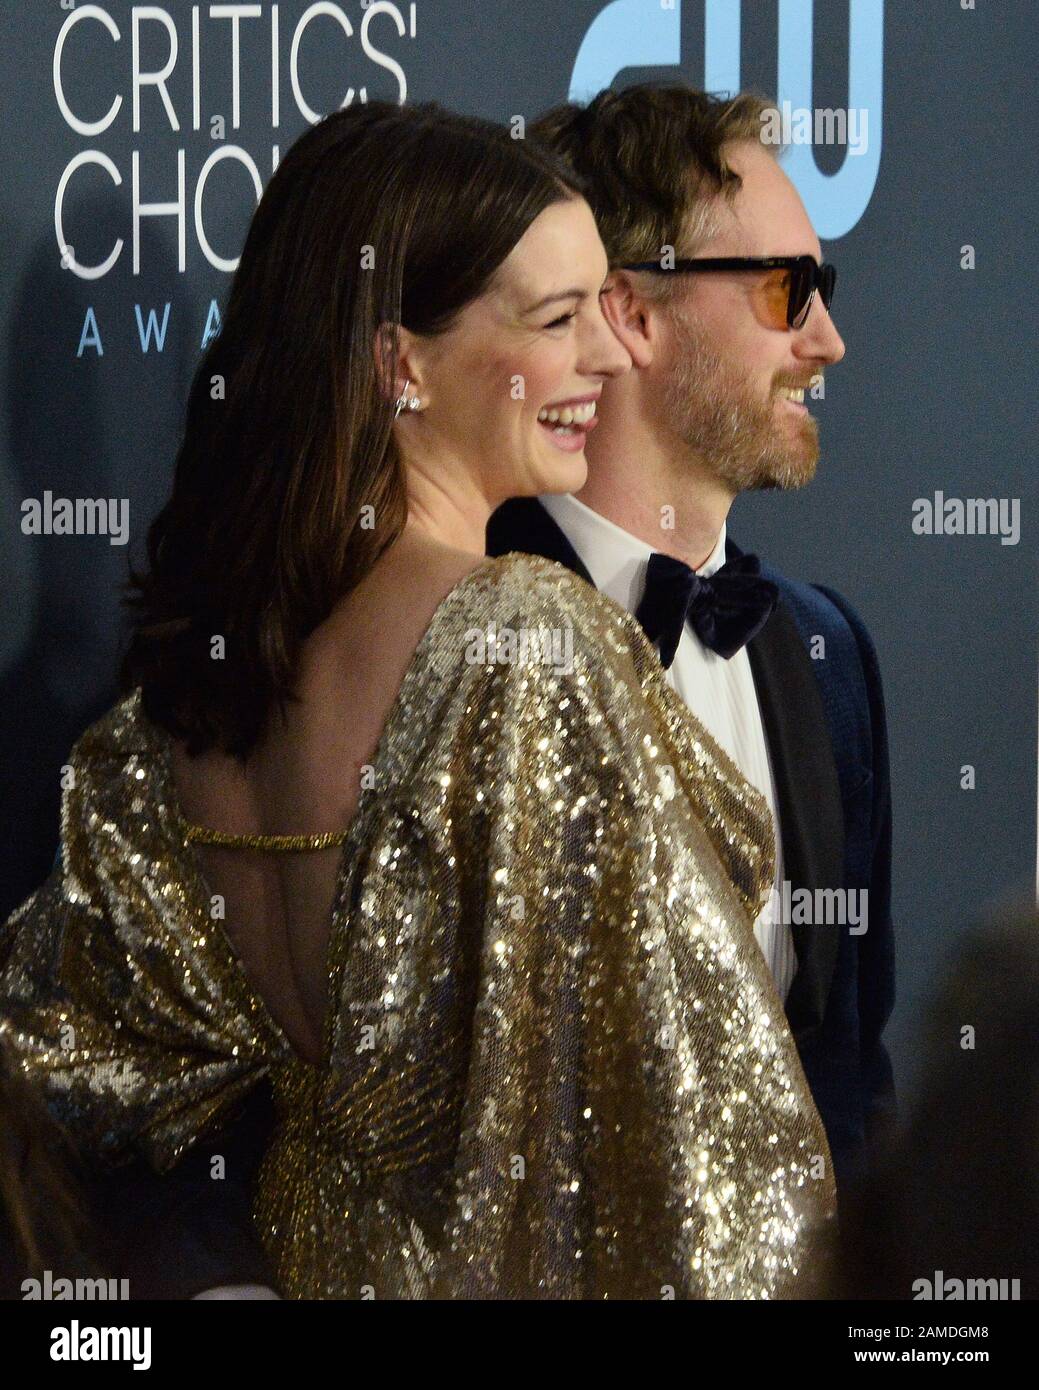 Santa Monica United States 13th Jan 2020 Actress Anne Hathaway And Her Husband Actor Adam Shulman Attend The 25th Annual Critics Choice Awards At Barker Hanger In Santa Monica California On Sunday January 12 2020 Photo By Jim Ruymenupi Credit Upialamy Live News 2AMDGM8 